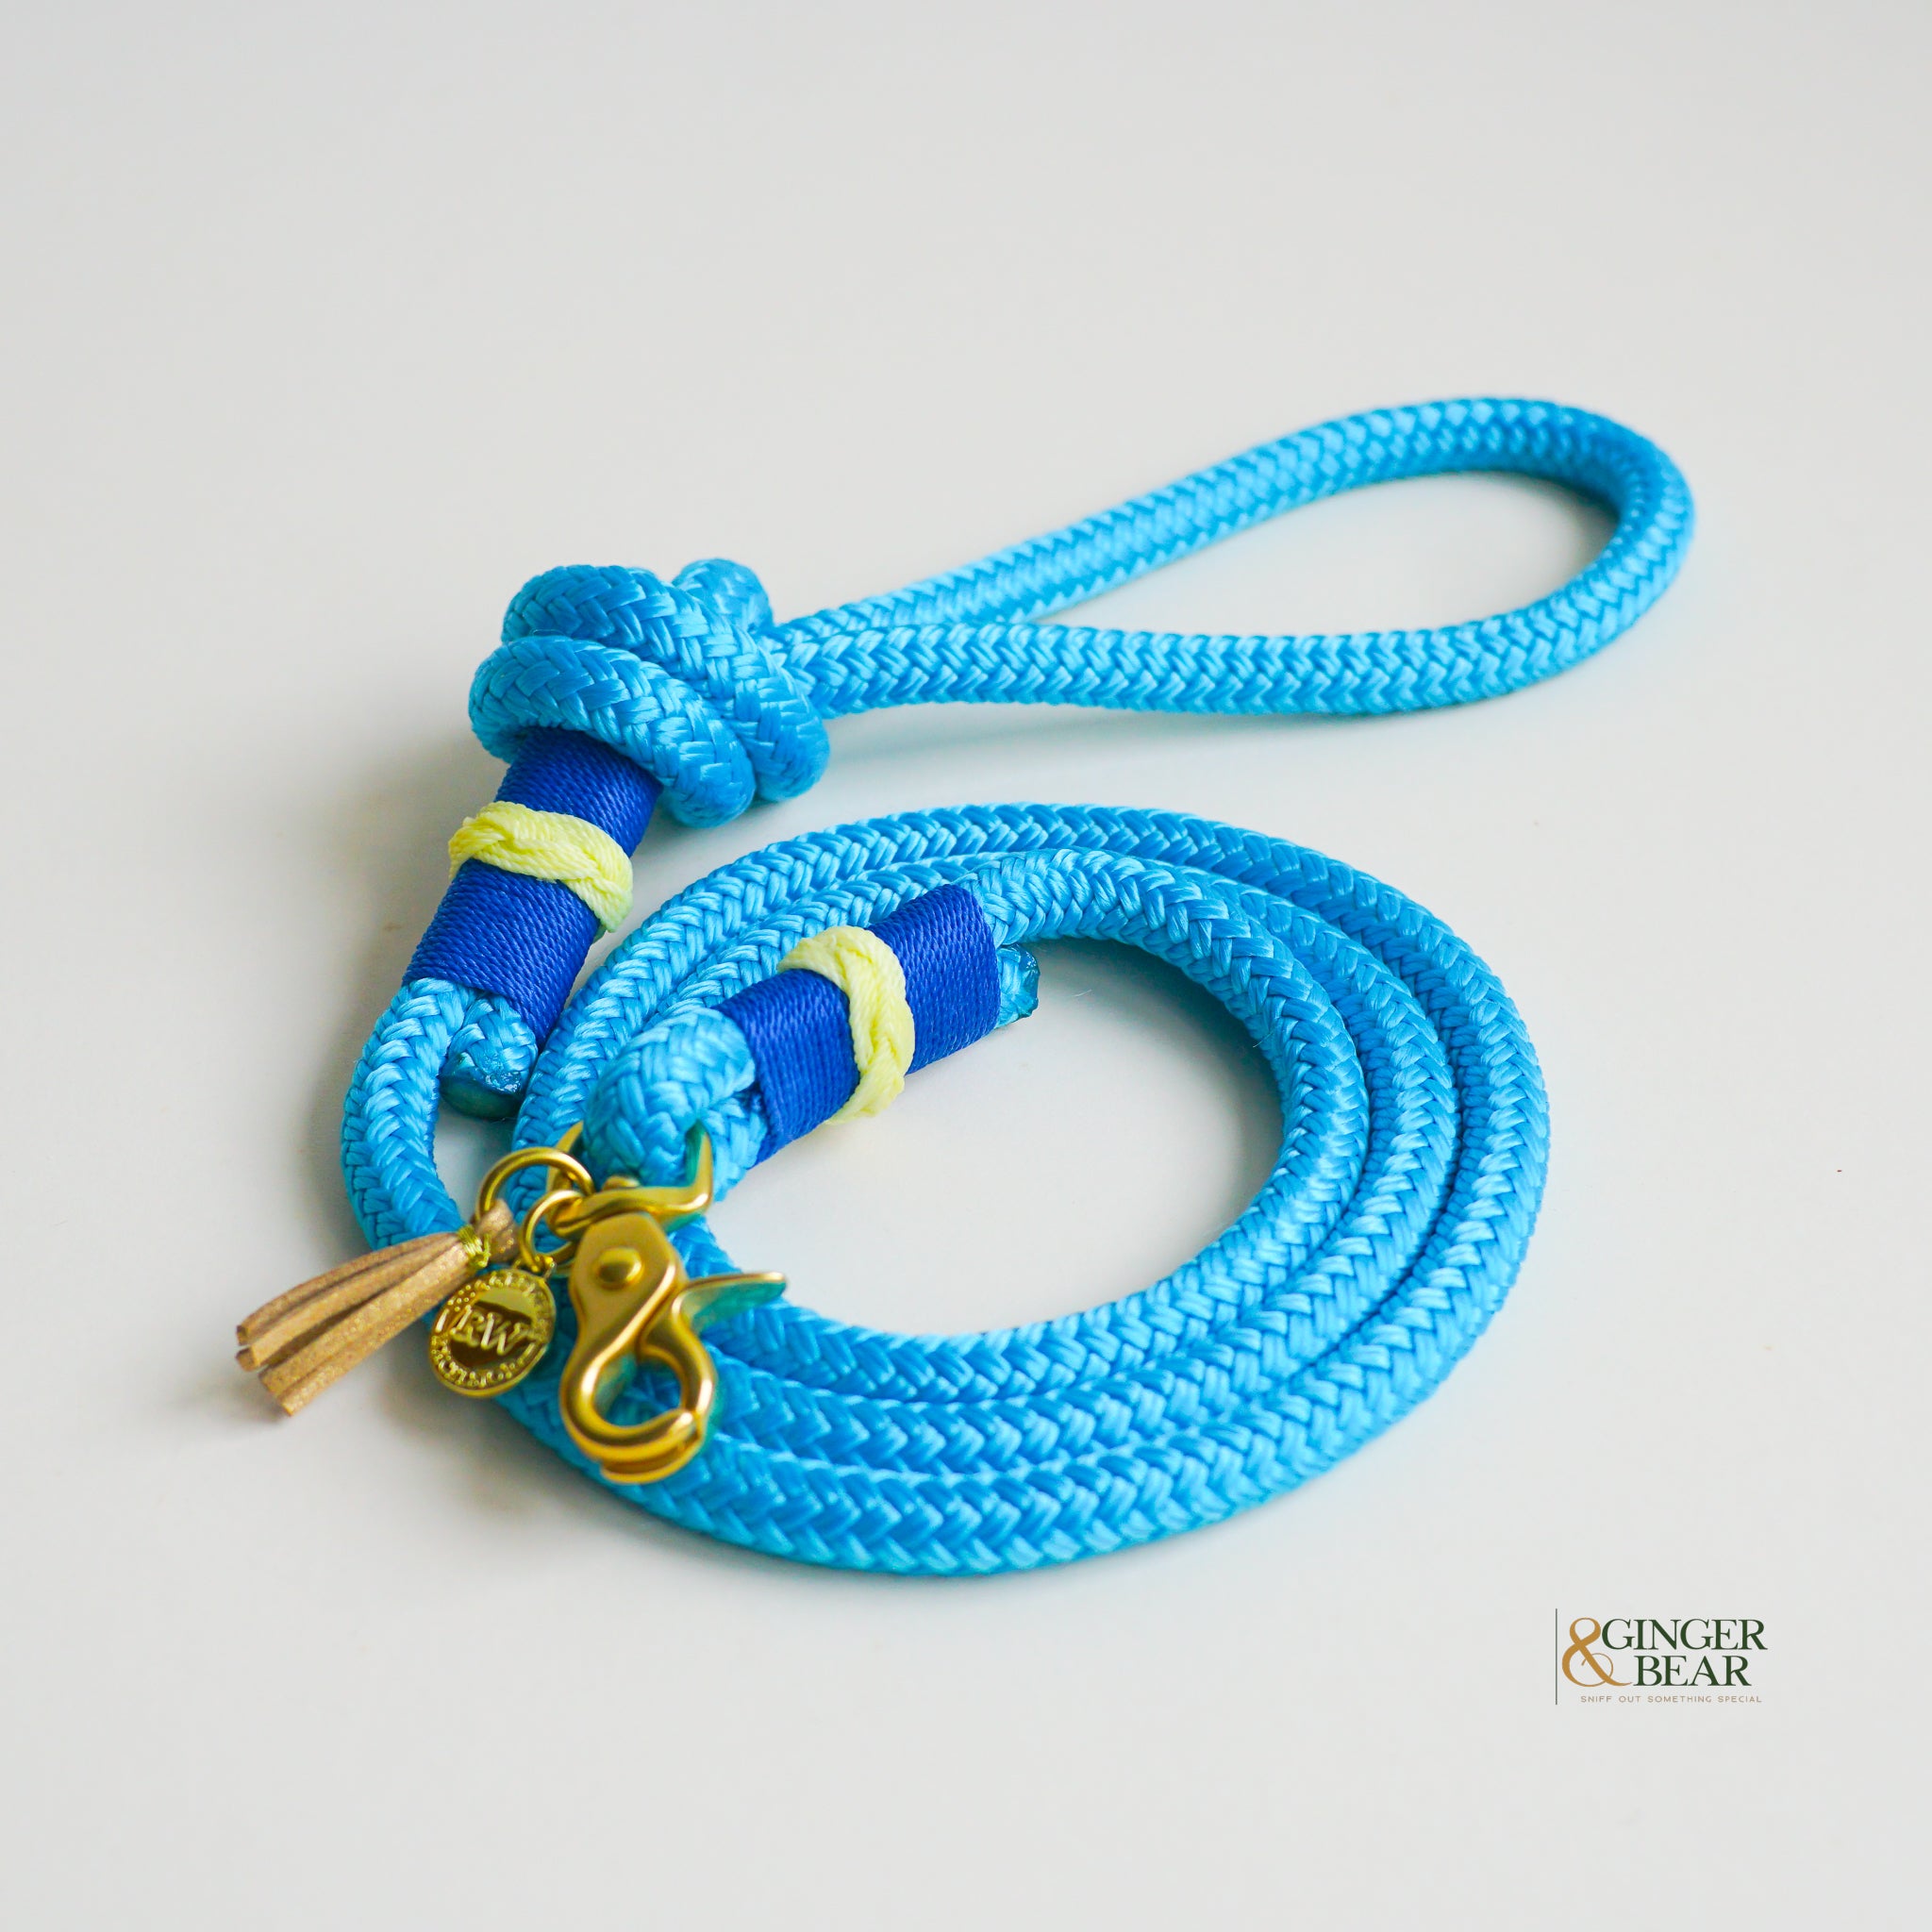 Rugged Hudson Dog Leash: Knotted Yellow on Light Blue rope